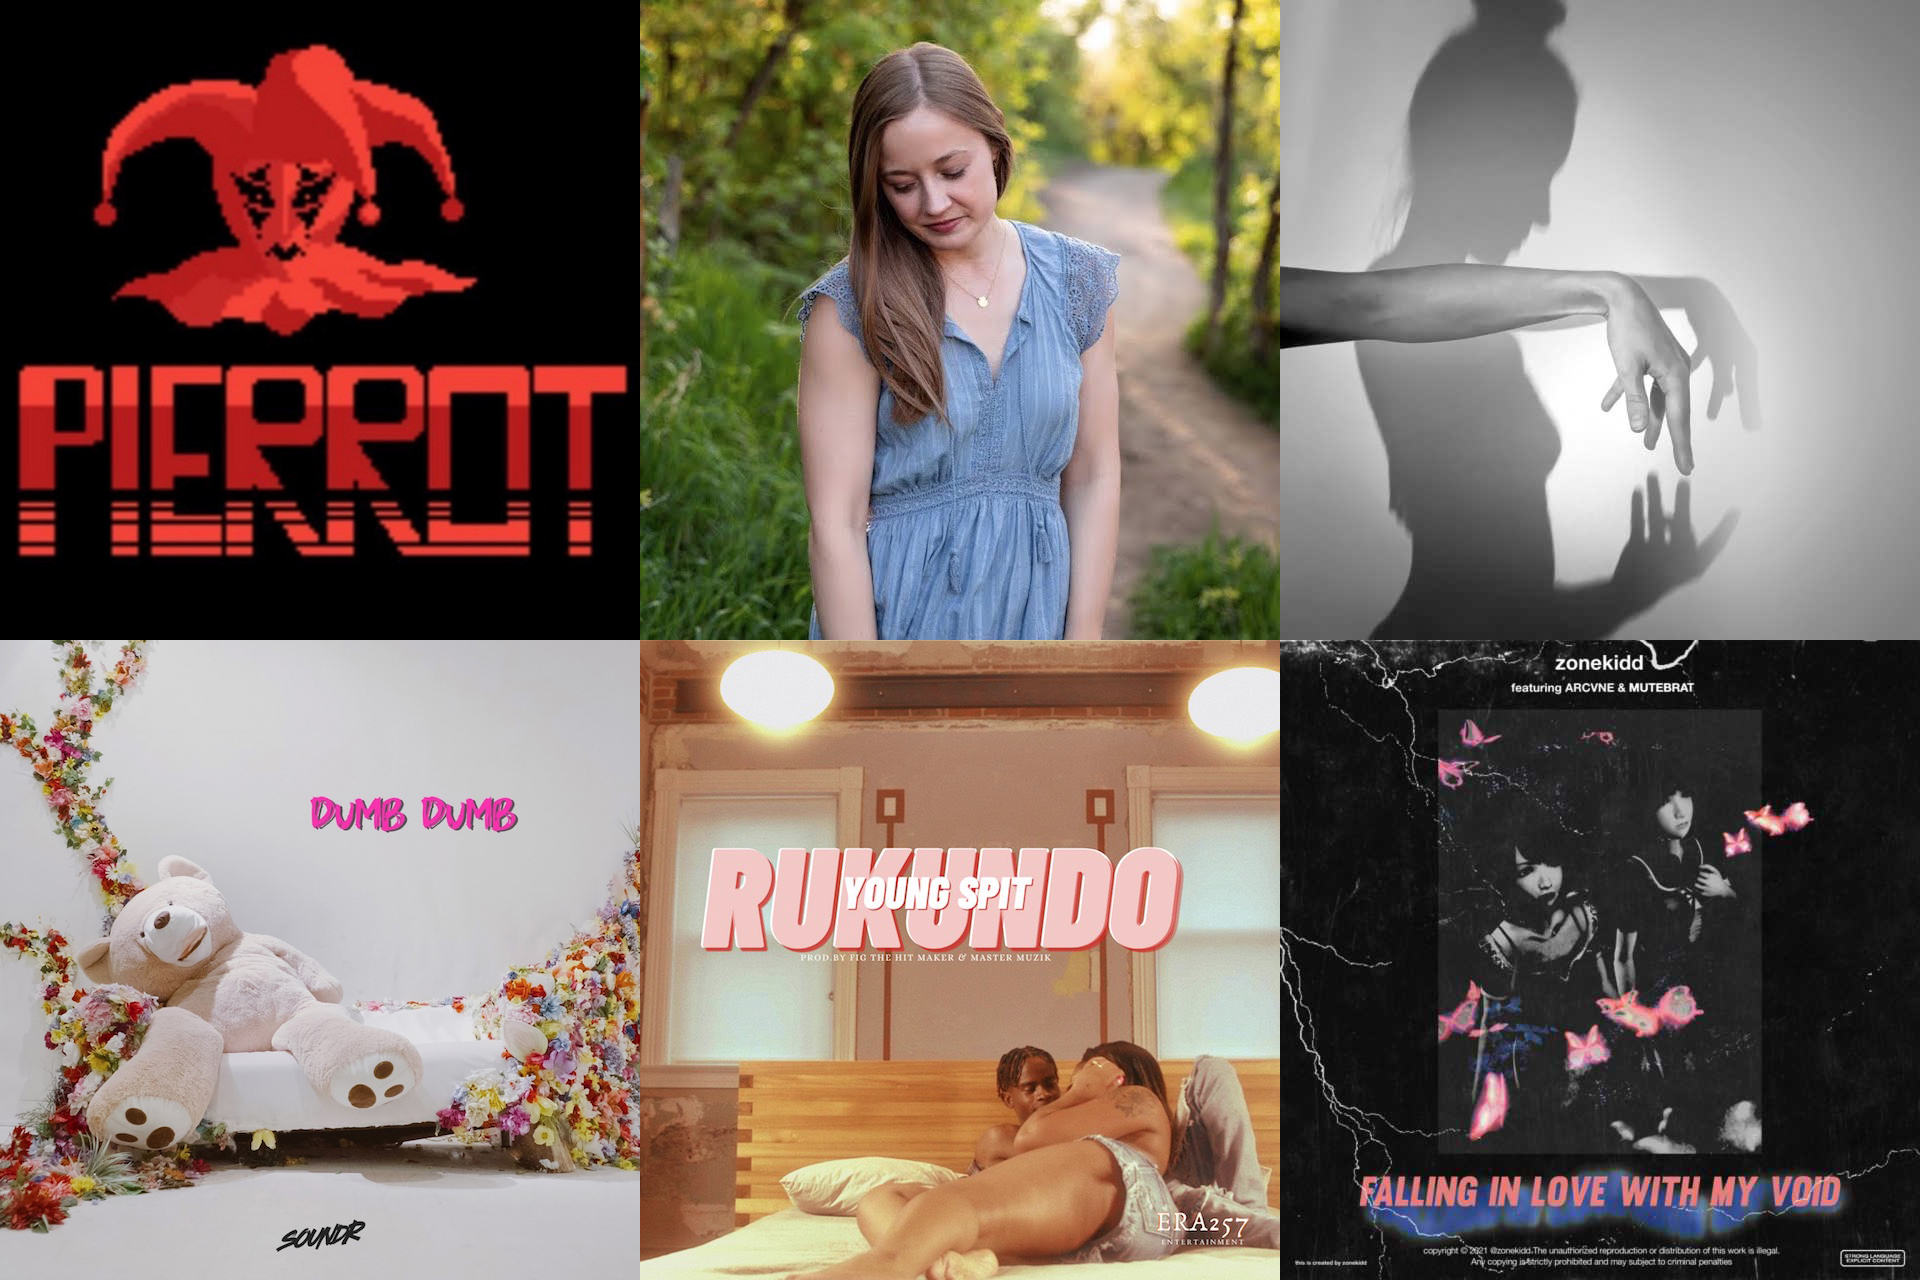 November's Local Music Singles Roundup has some talented Utah locals that are guaranteed to mix up your music rotation.